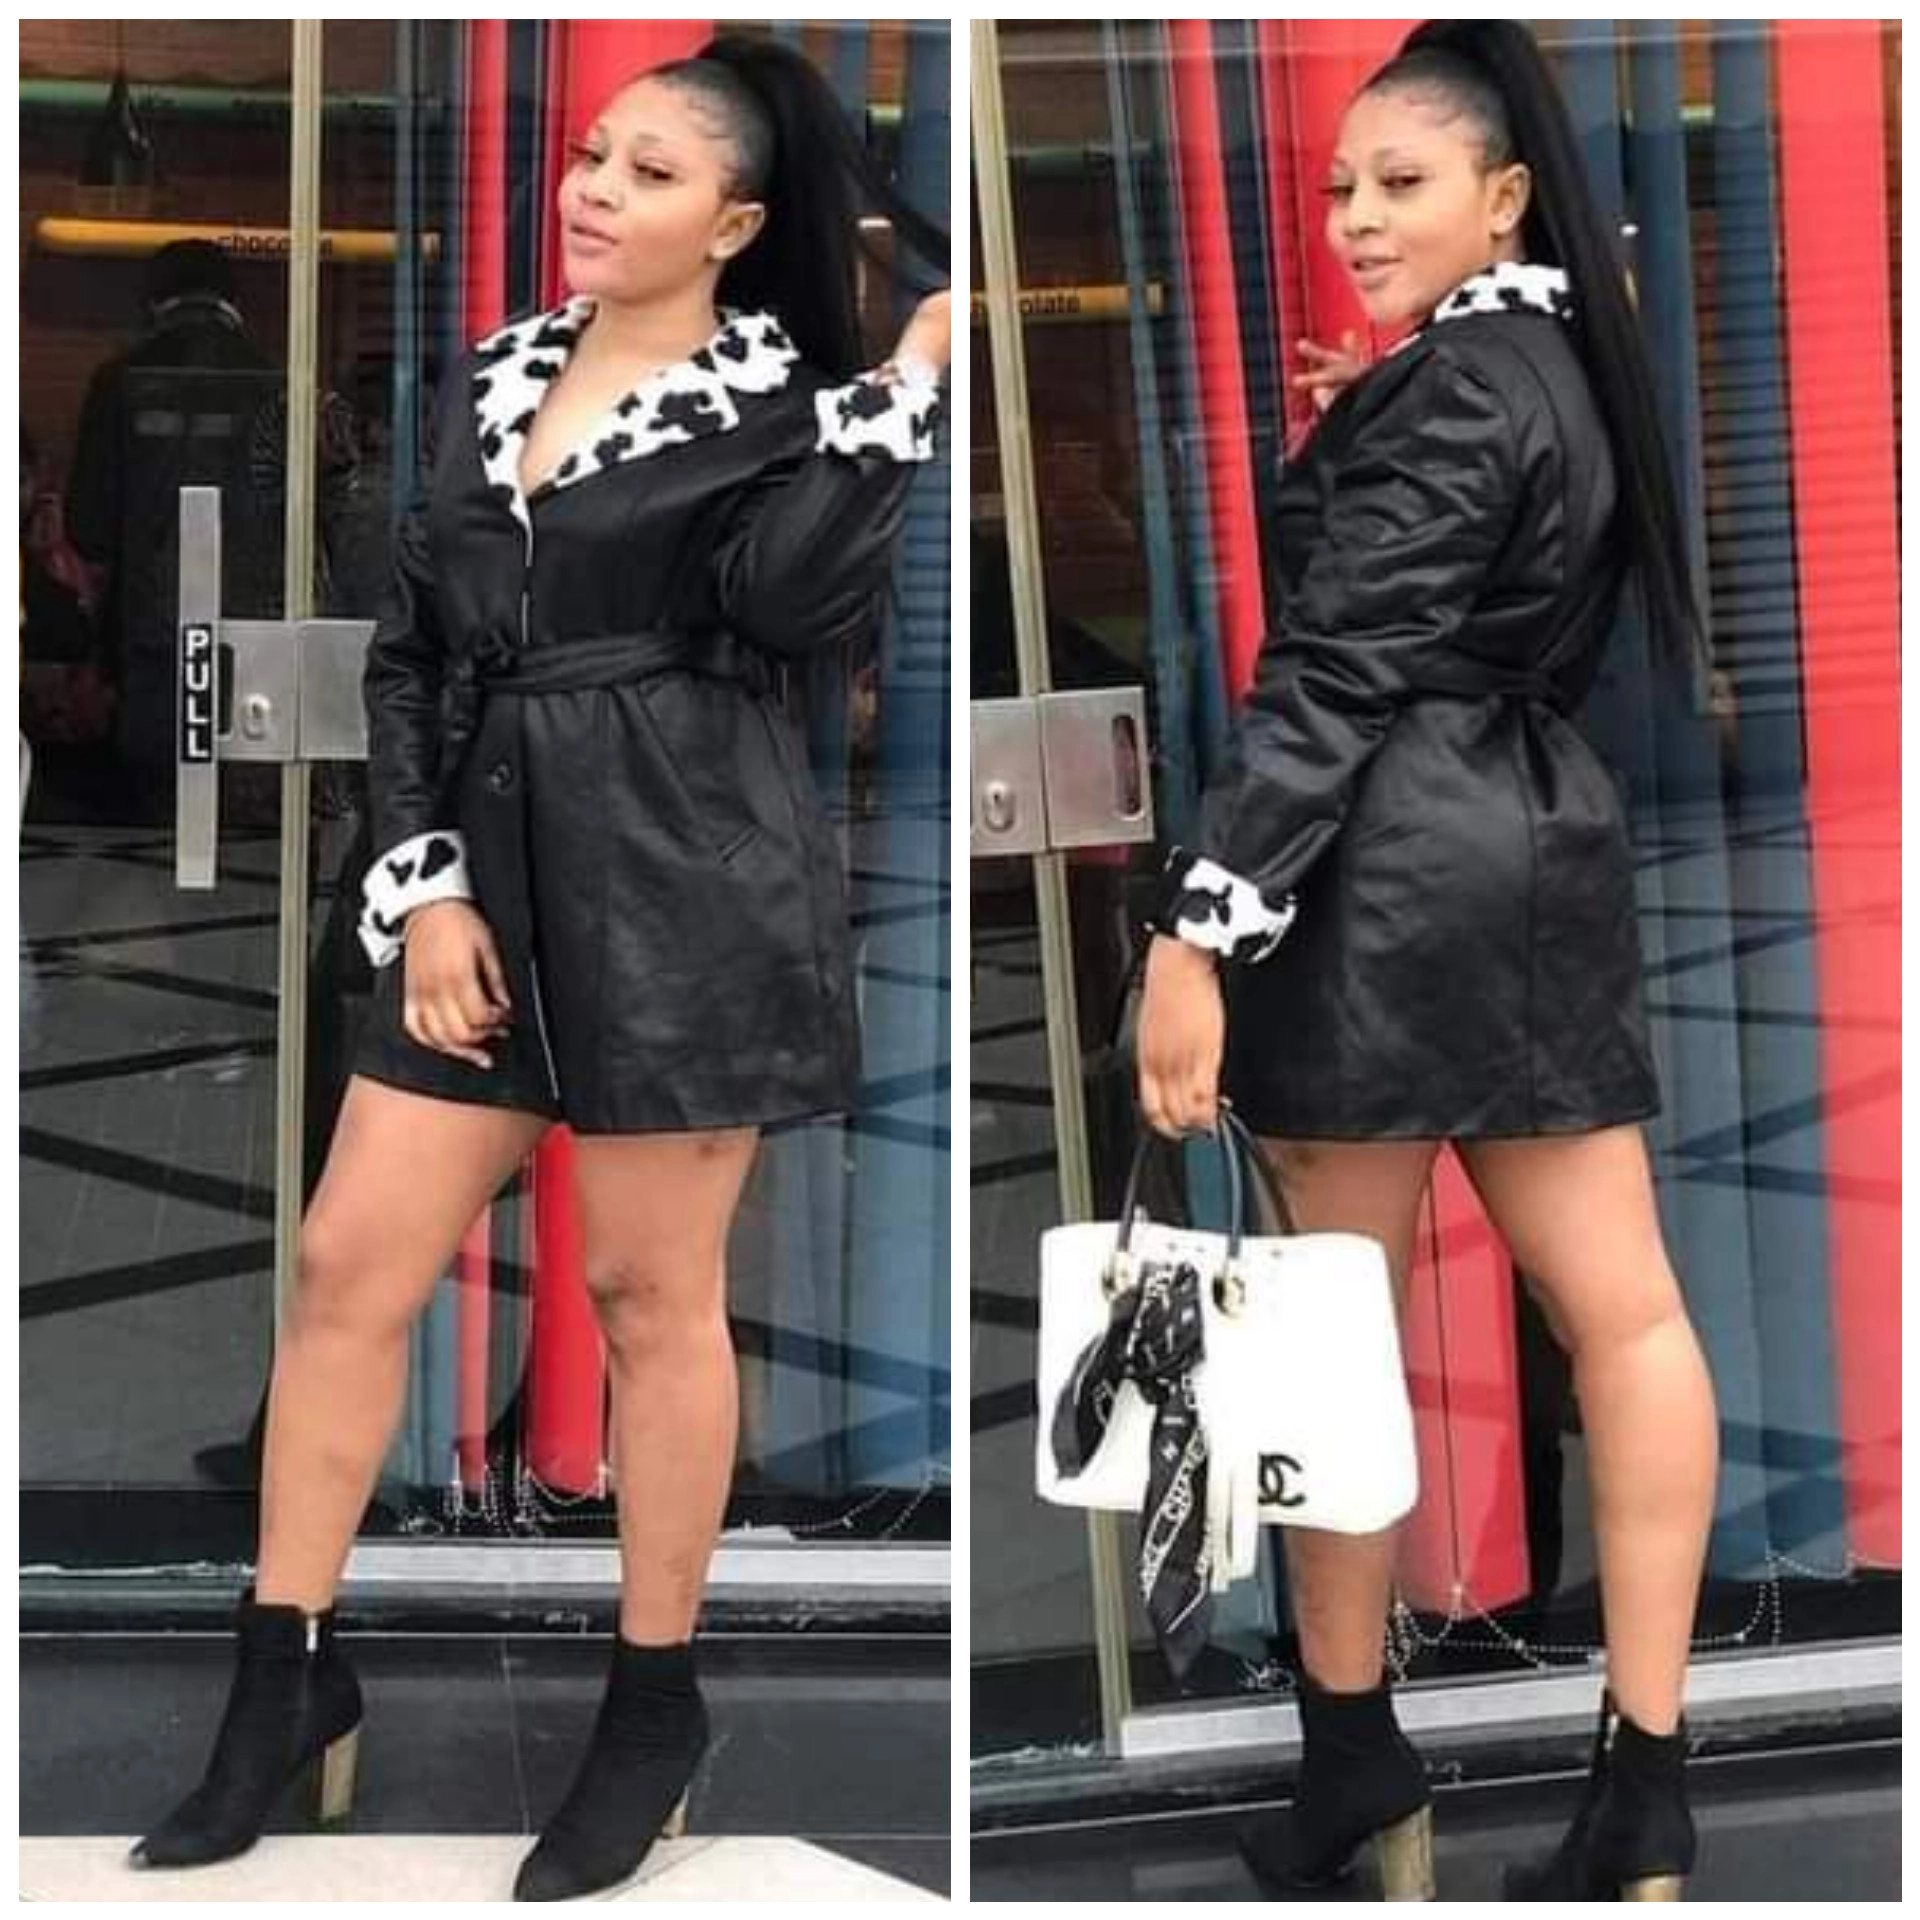 28 Year-Old Nigerian lady Reportedly Dies During Plastic Surgery